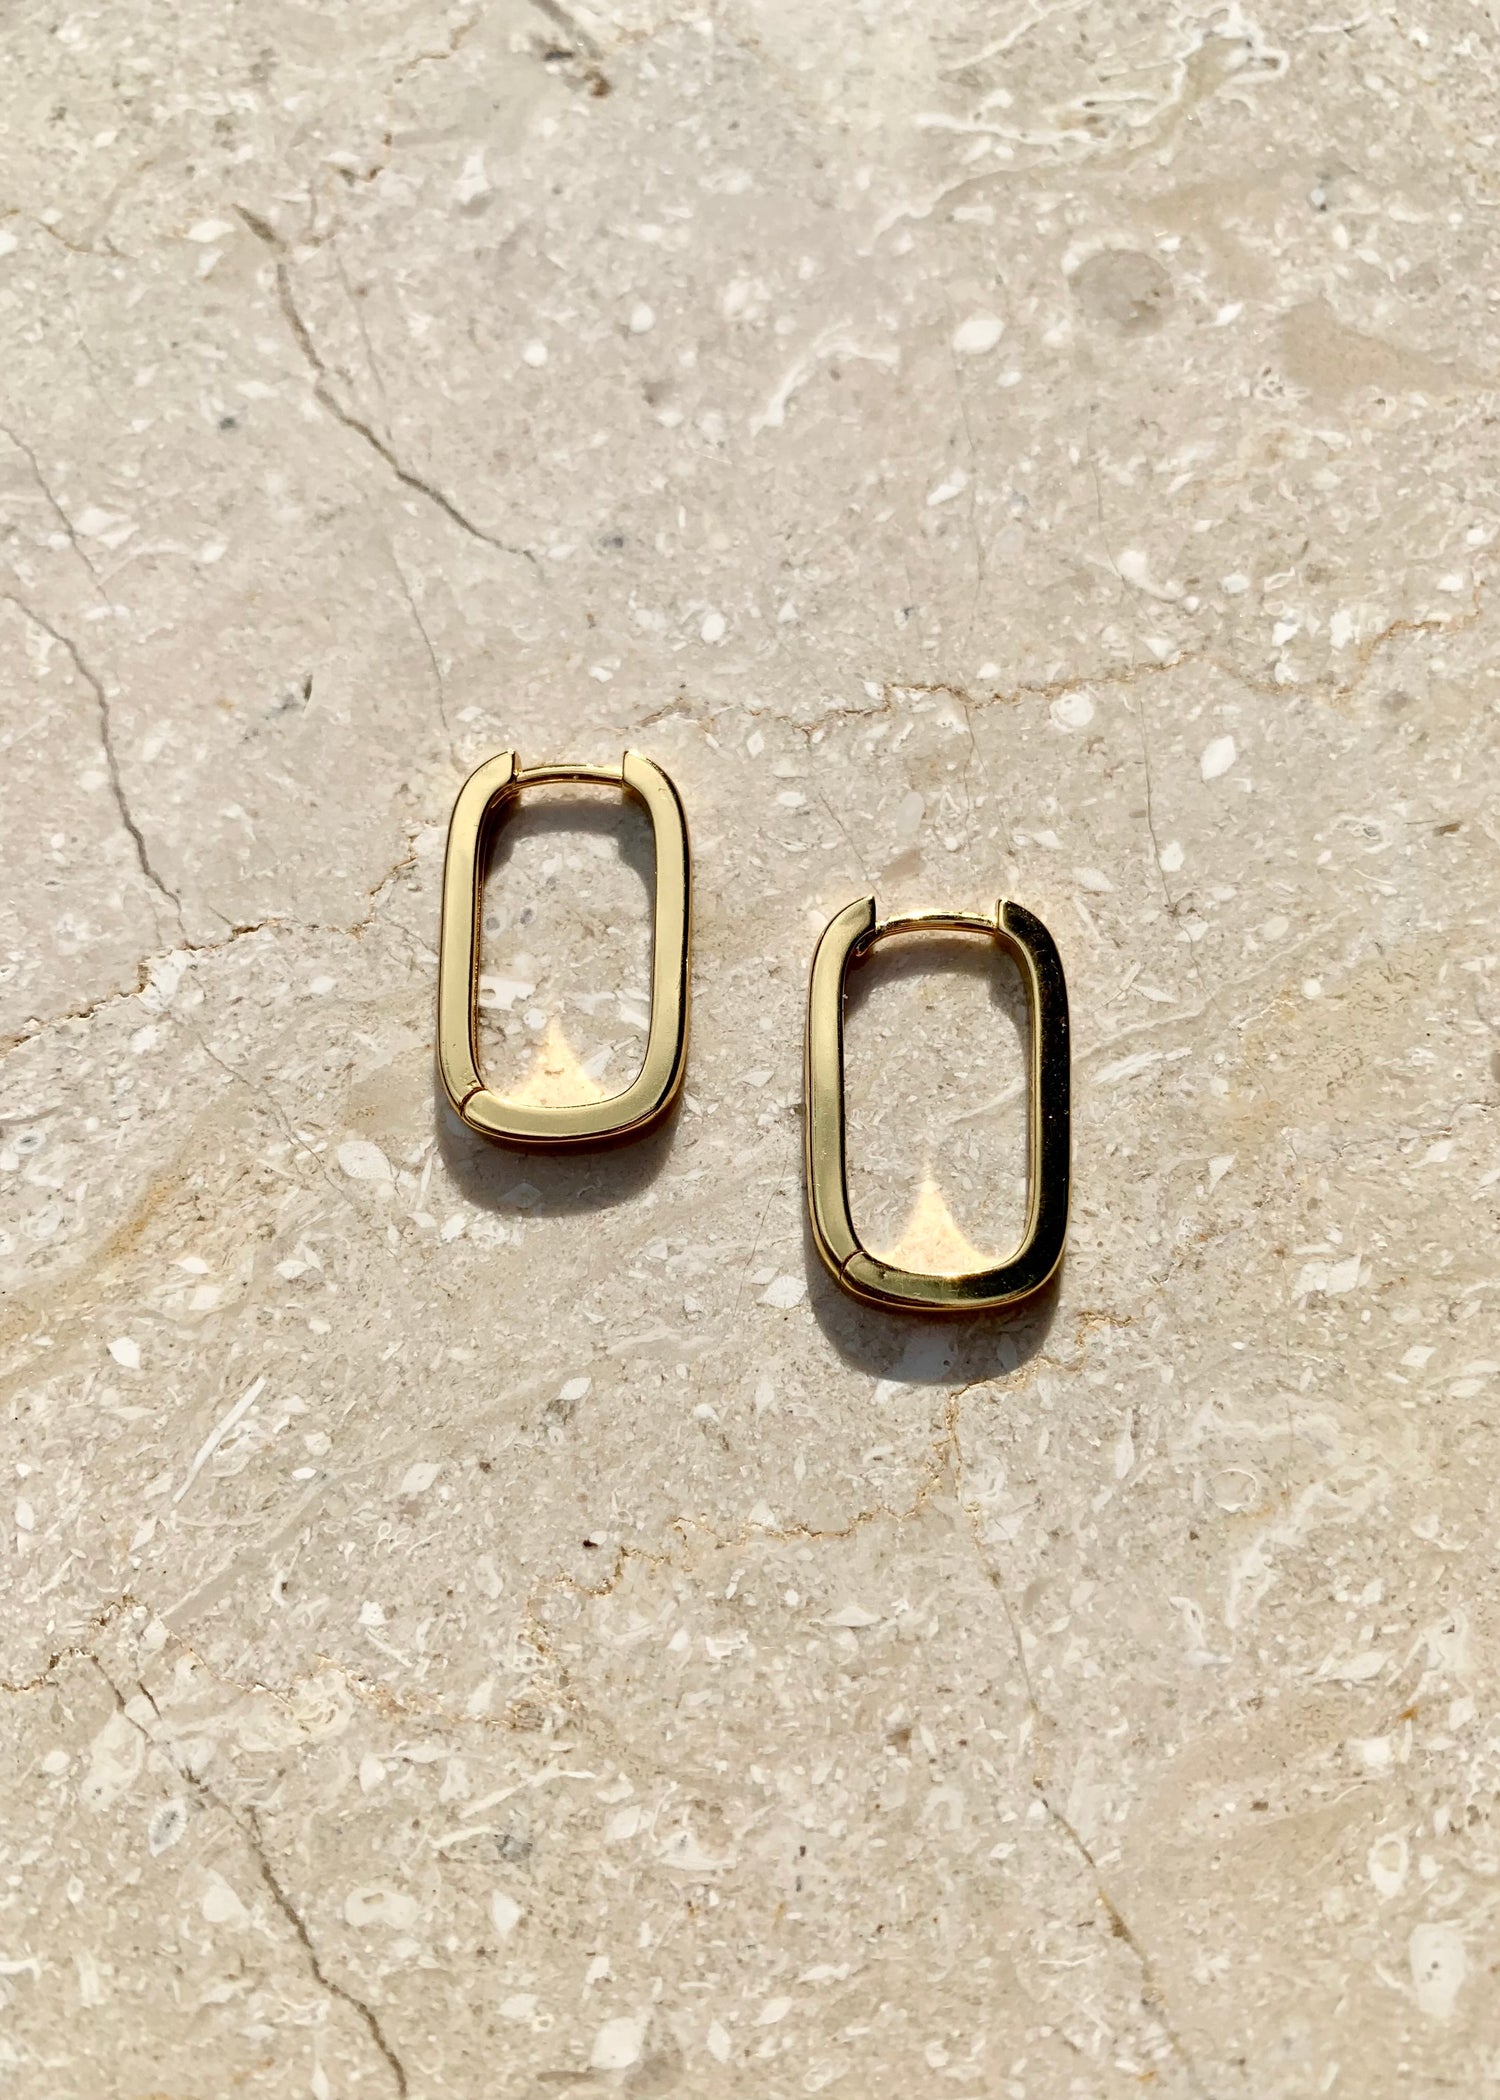 Featured: A Pair of Gold, Squoval shaped, dainty hoop earrings. (6695455457361)